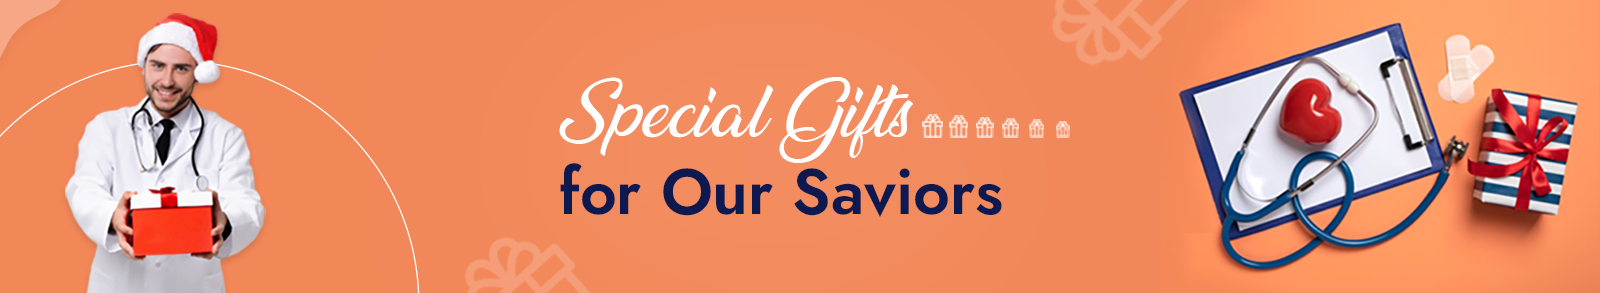 Special Gifts for Our Saviors_1600